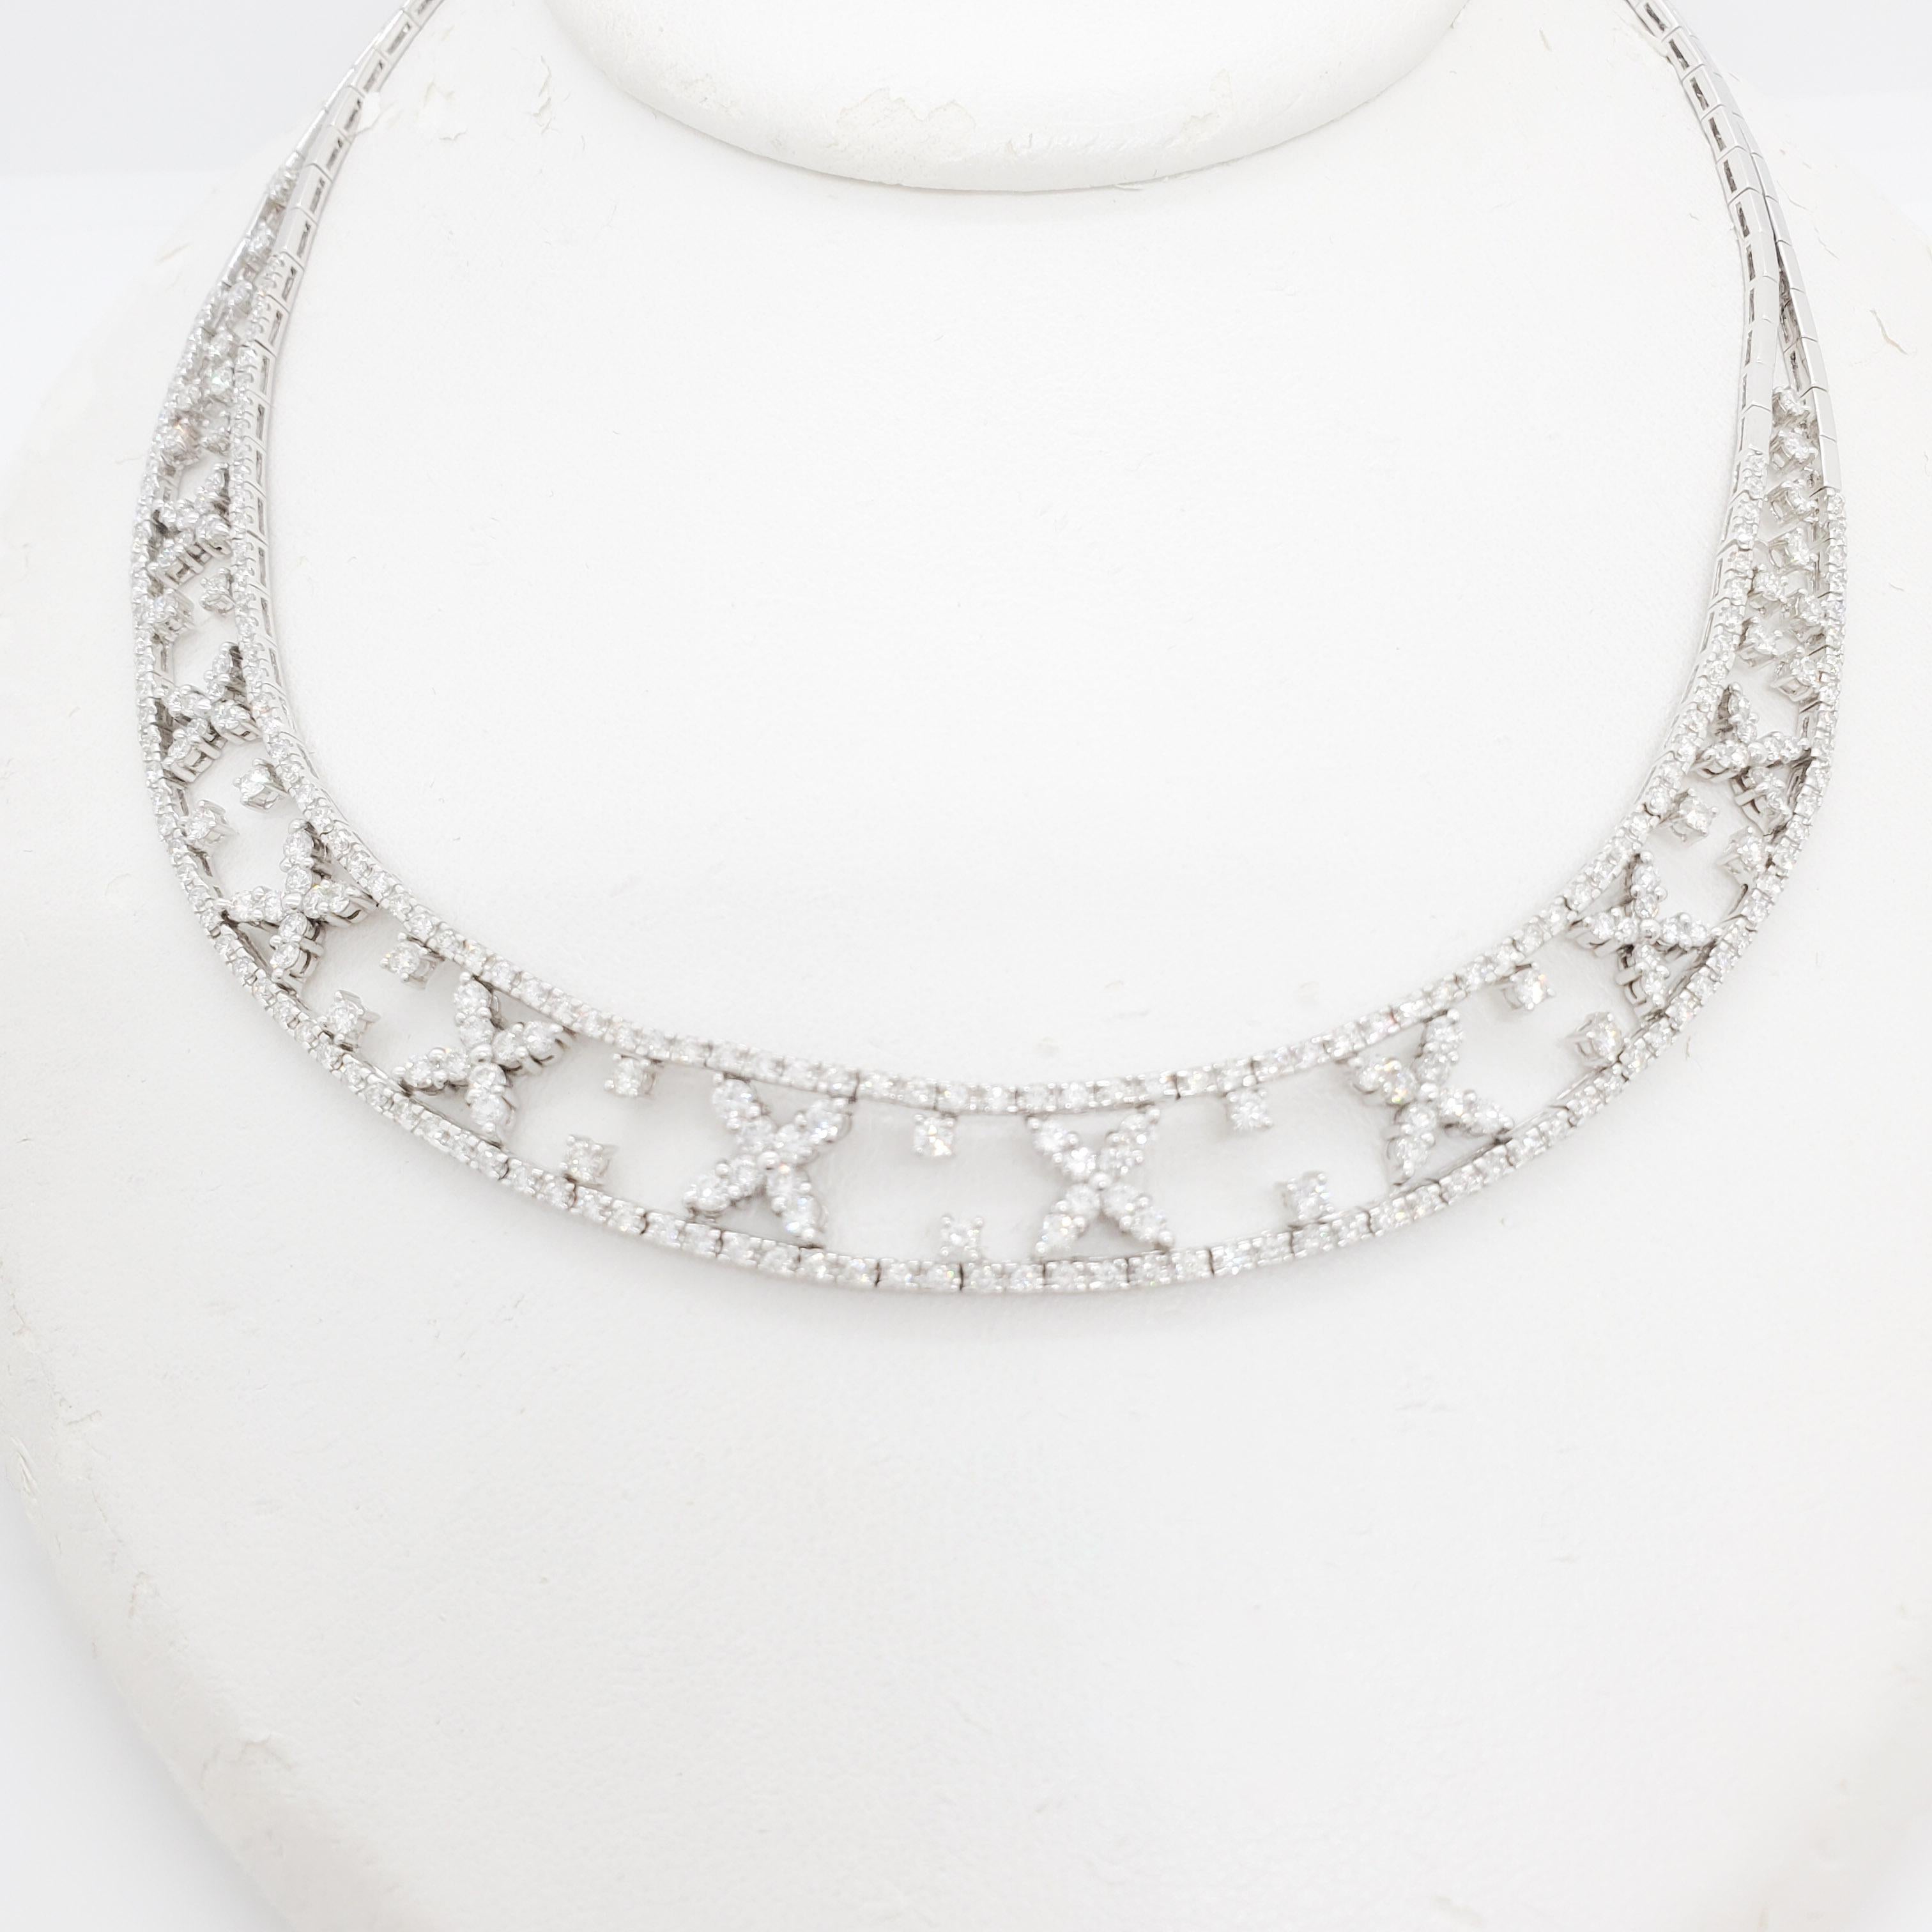 Gorgeous 3.50 ct. of good quality, white, and bright diamond rounds and marquise shapes.  Handmade in 18k white gold.  Length of this necklace is 16.5